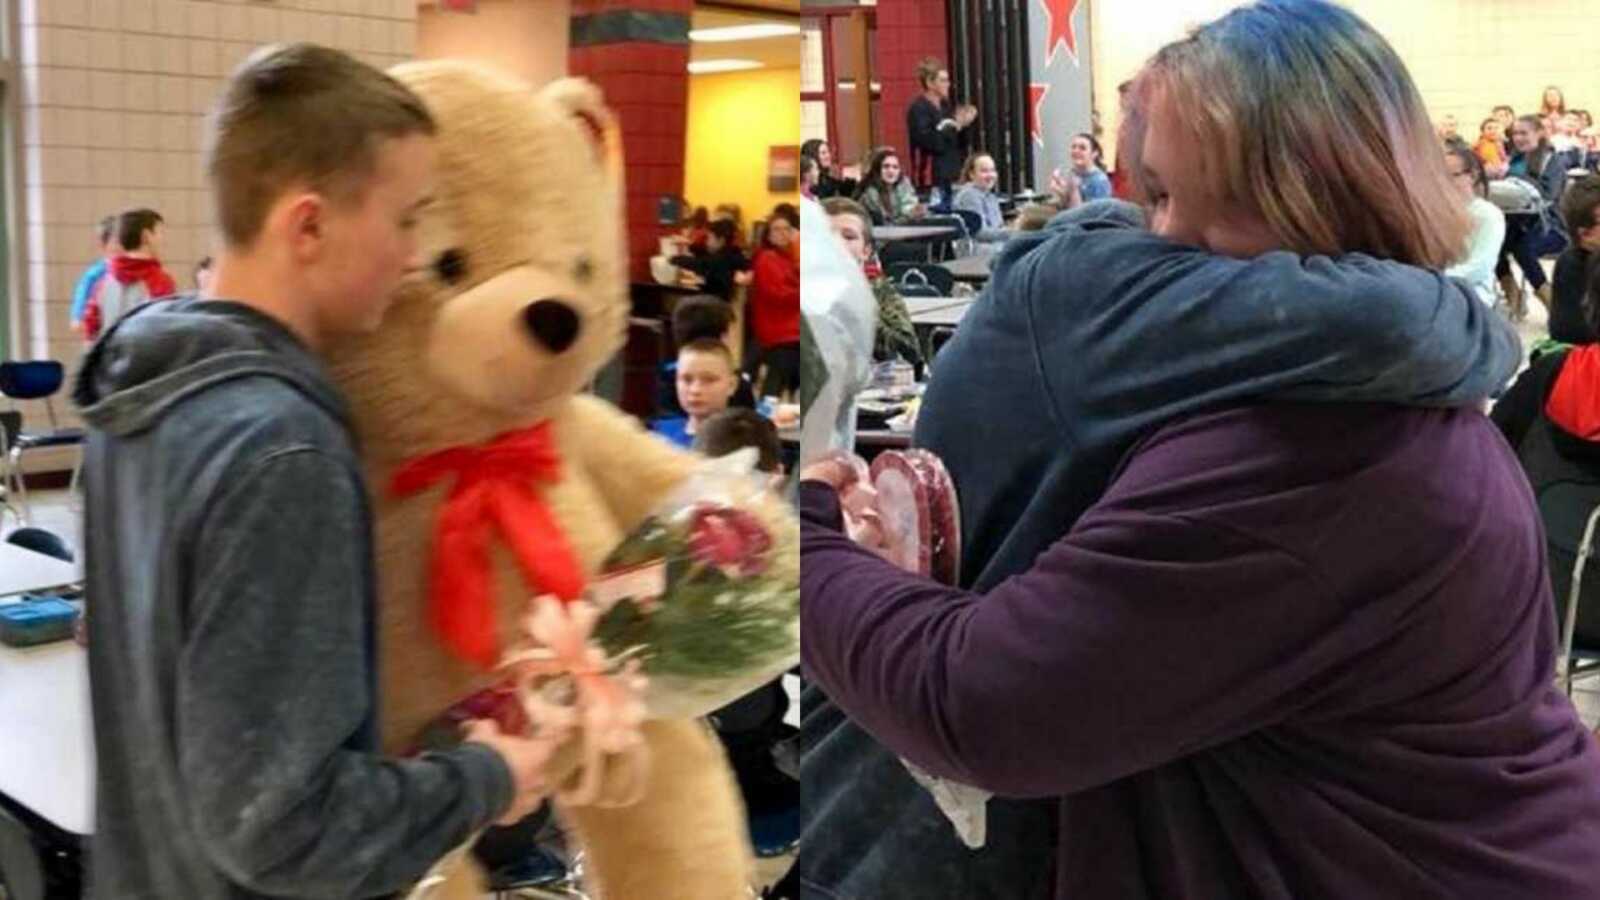 boy gifts bullied girl a teddy bear and flowers at school after she is bullied on Valentine's Day